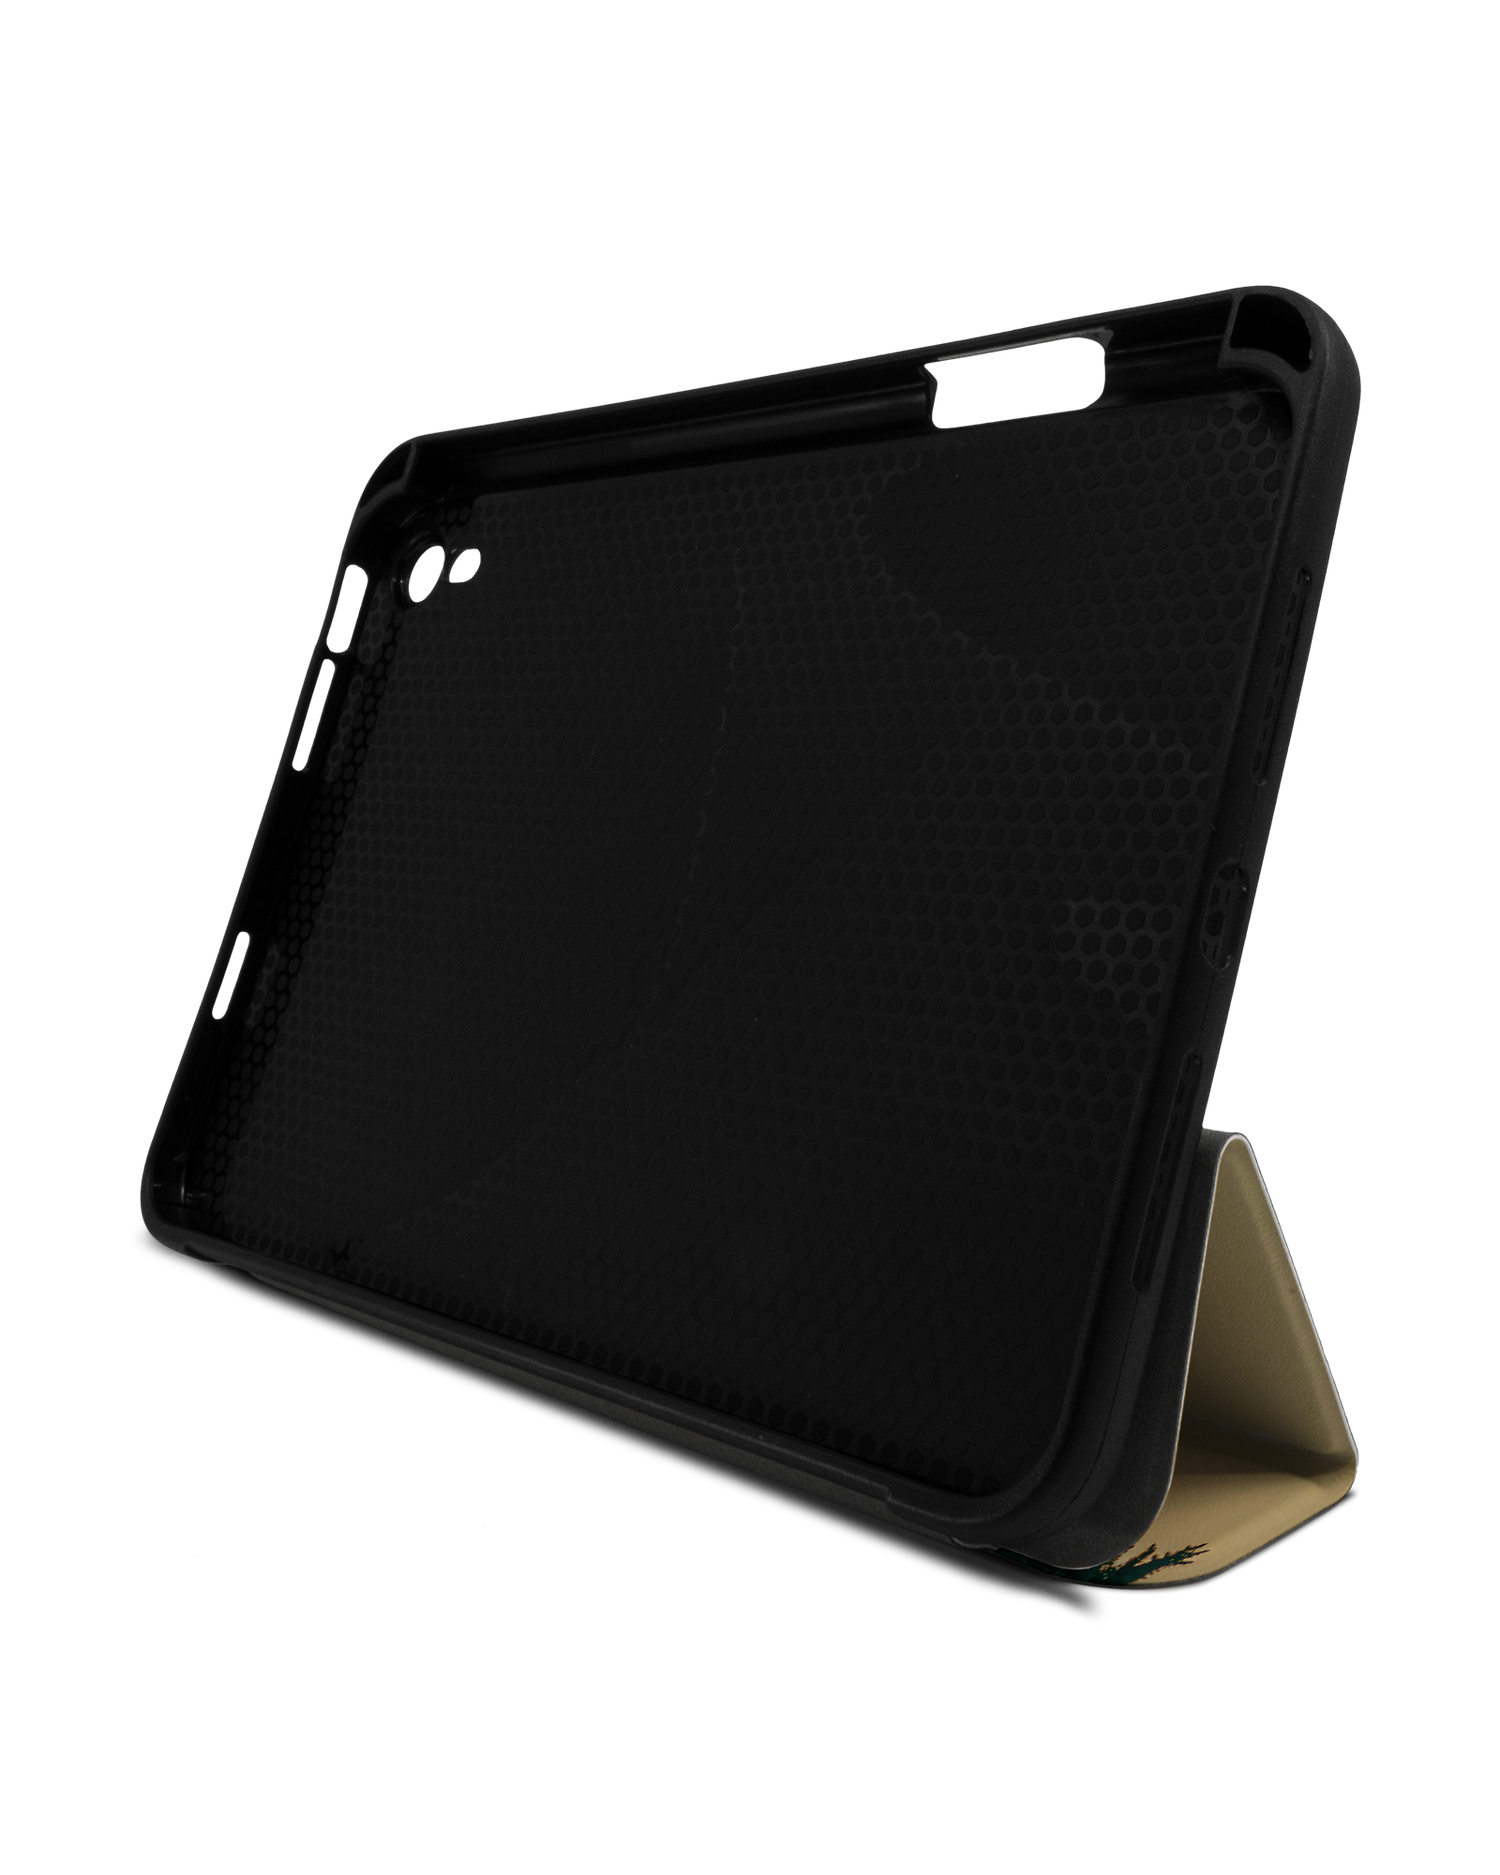 Forest iPad Case with Pencil Holder Apple iPad mini 6 (2021): Set up in landscape format (front view)